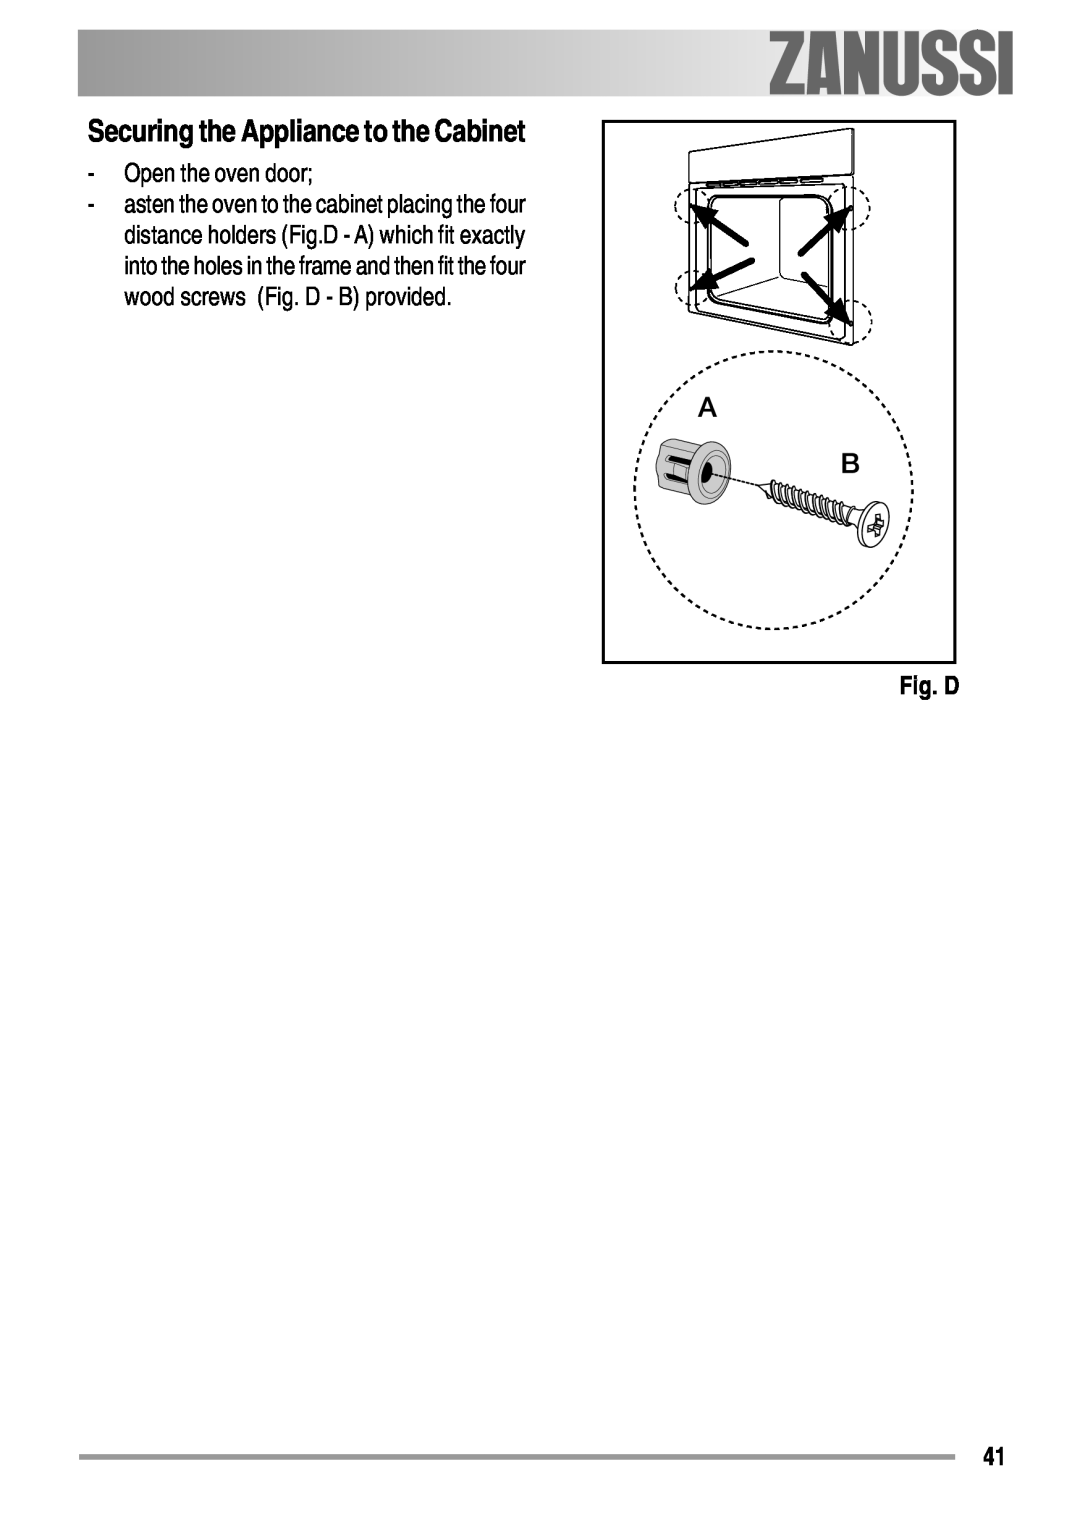 Zanussi ZYB 594 manual Securing the Appliance to the Cabinet, Open the oven door, Fig. D, electrolux 